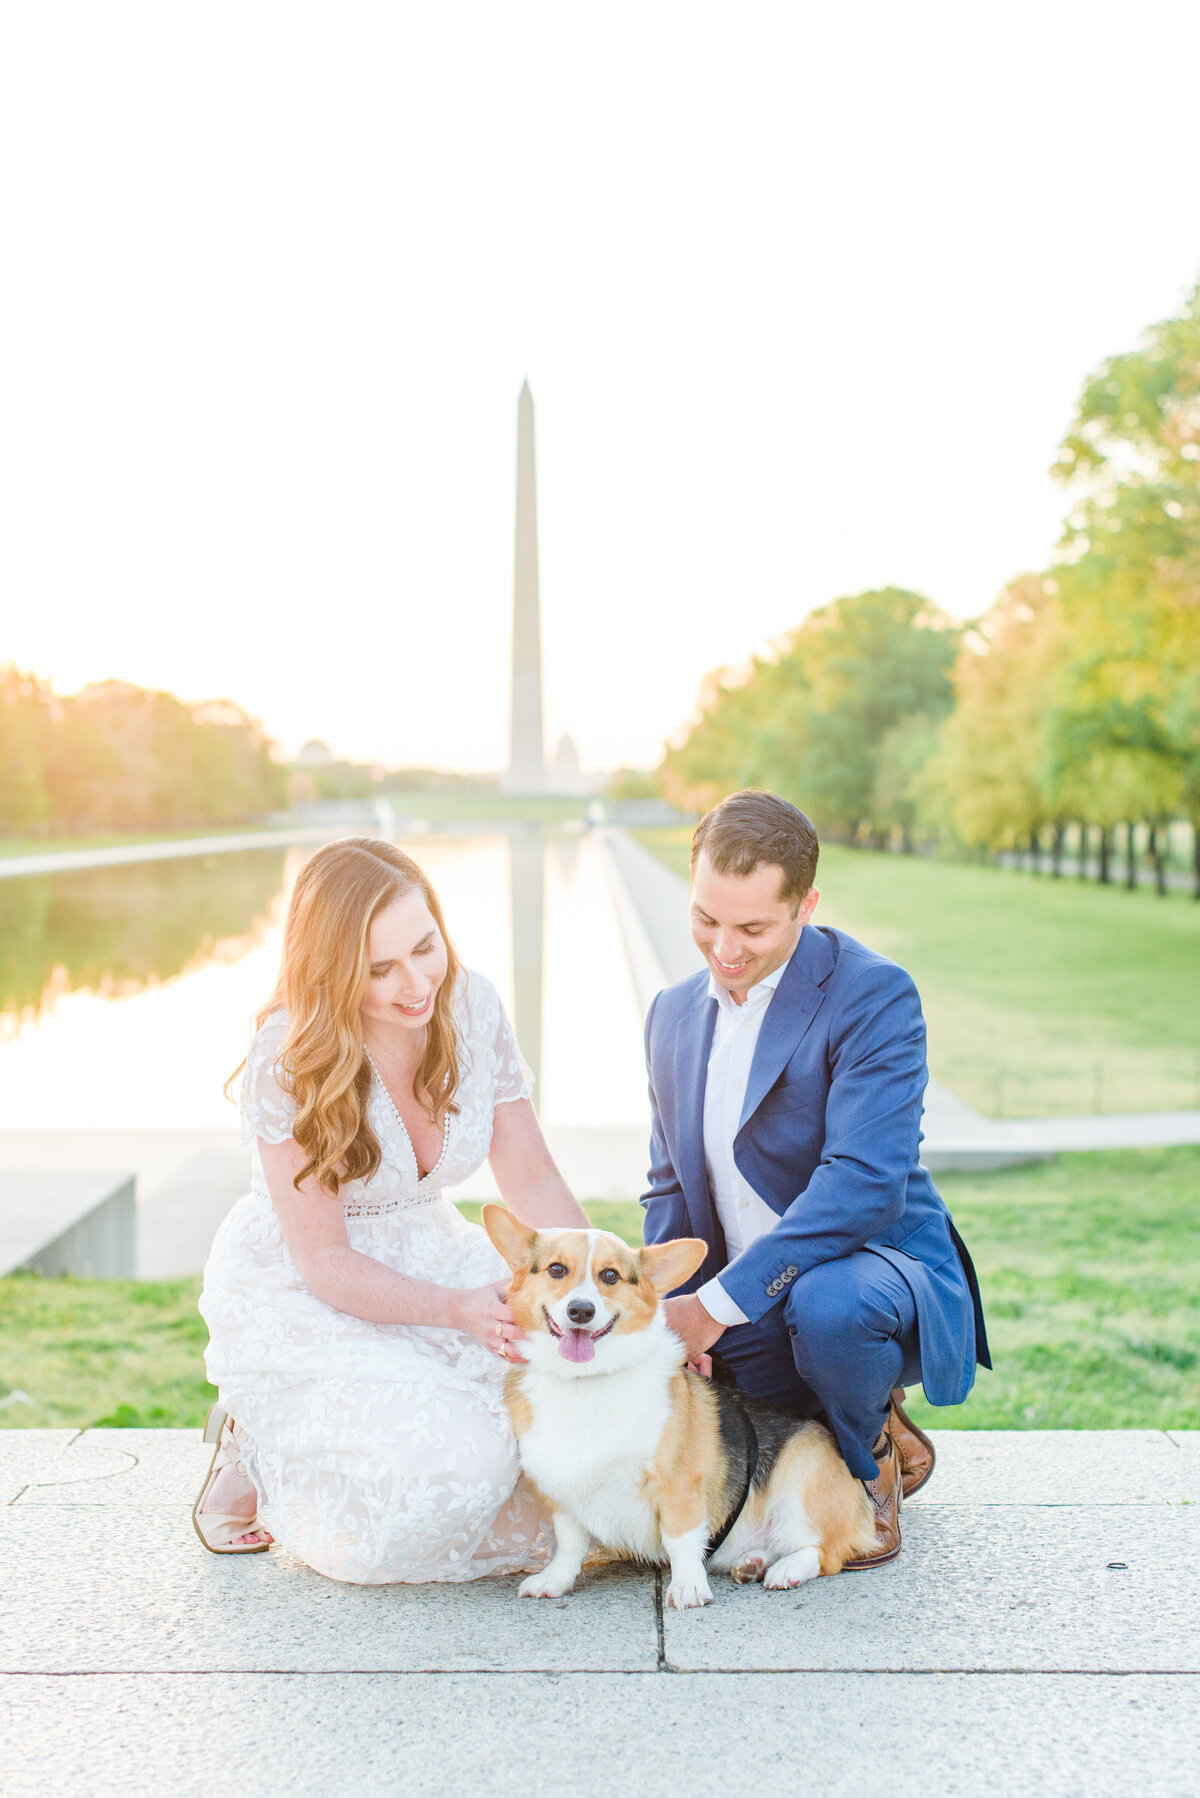 Lincoln Memorial Engagement Photographer in Washington DC